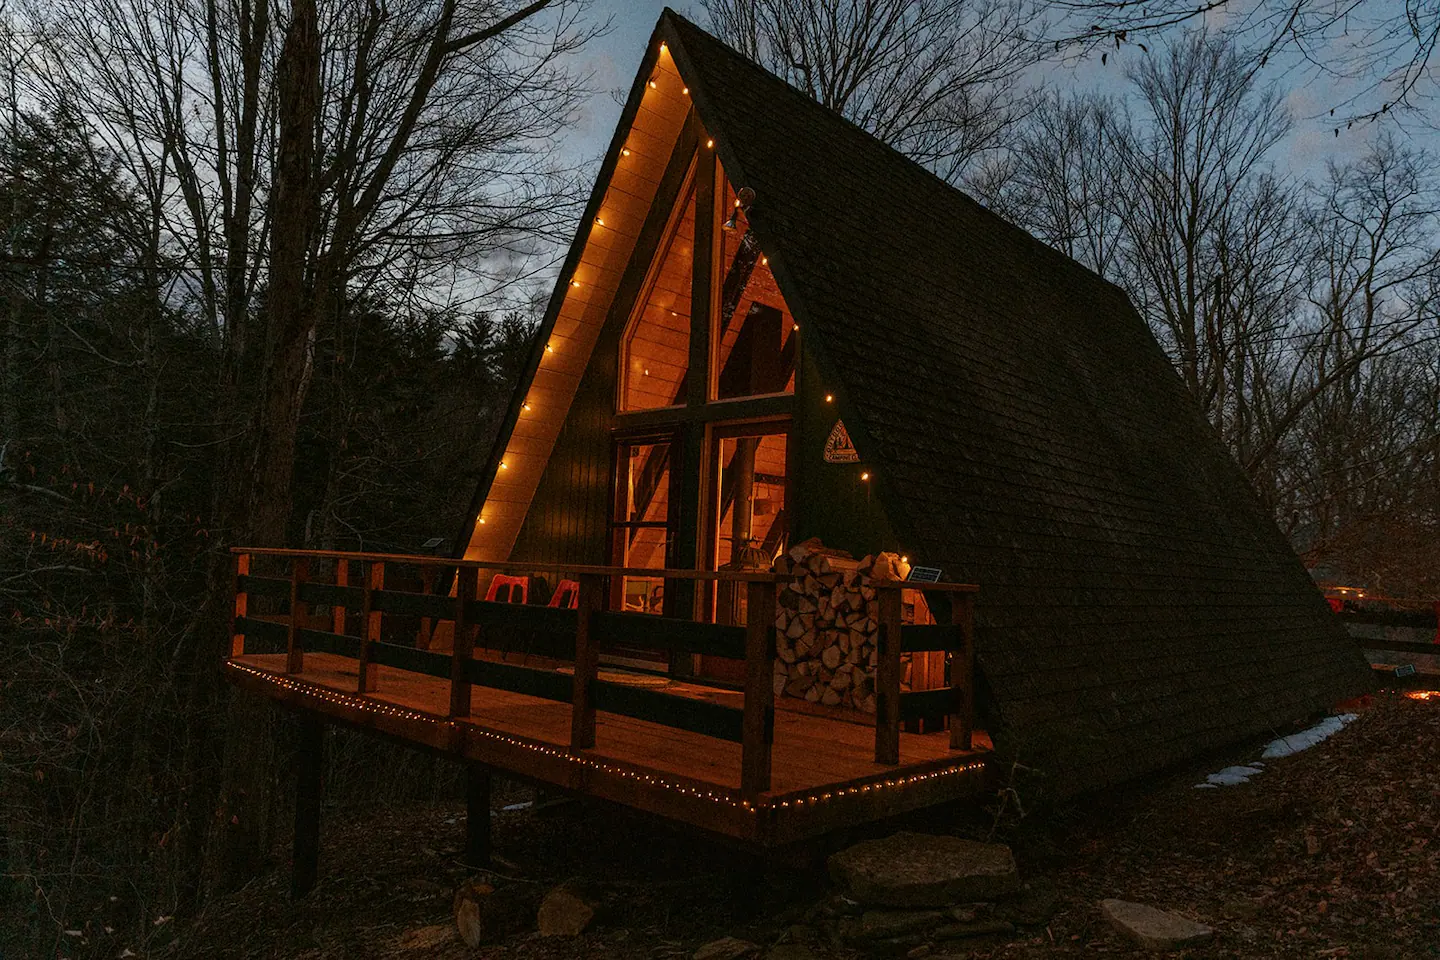 An A-frame vacation rental with twinkly lights and a huge stack of firewood on the porch.